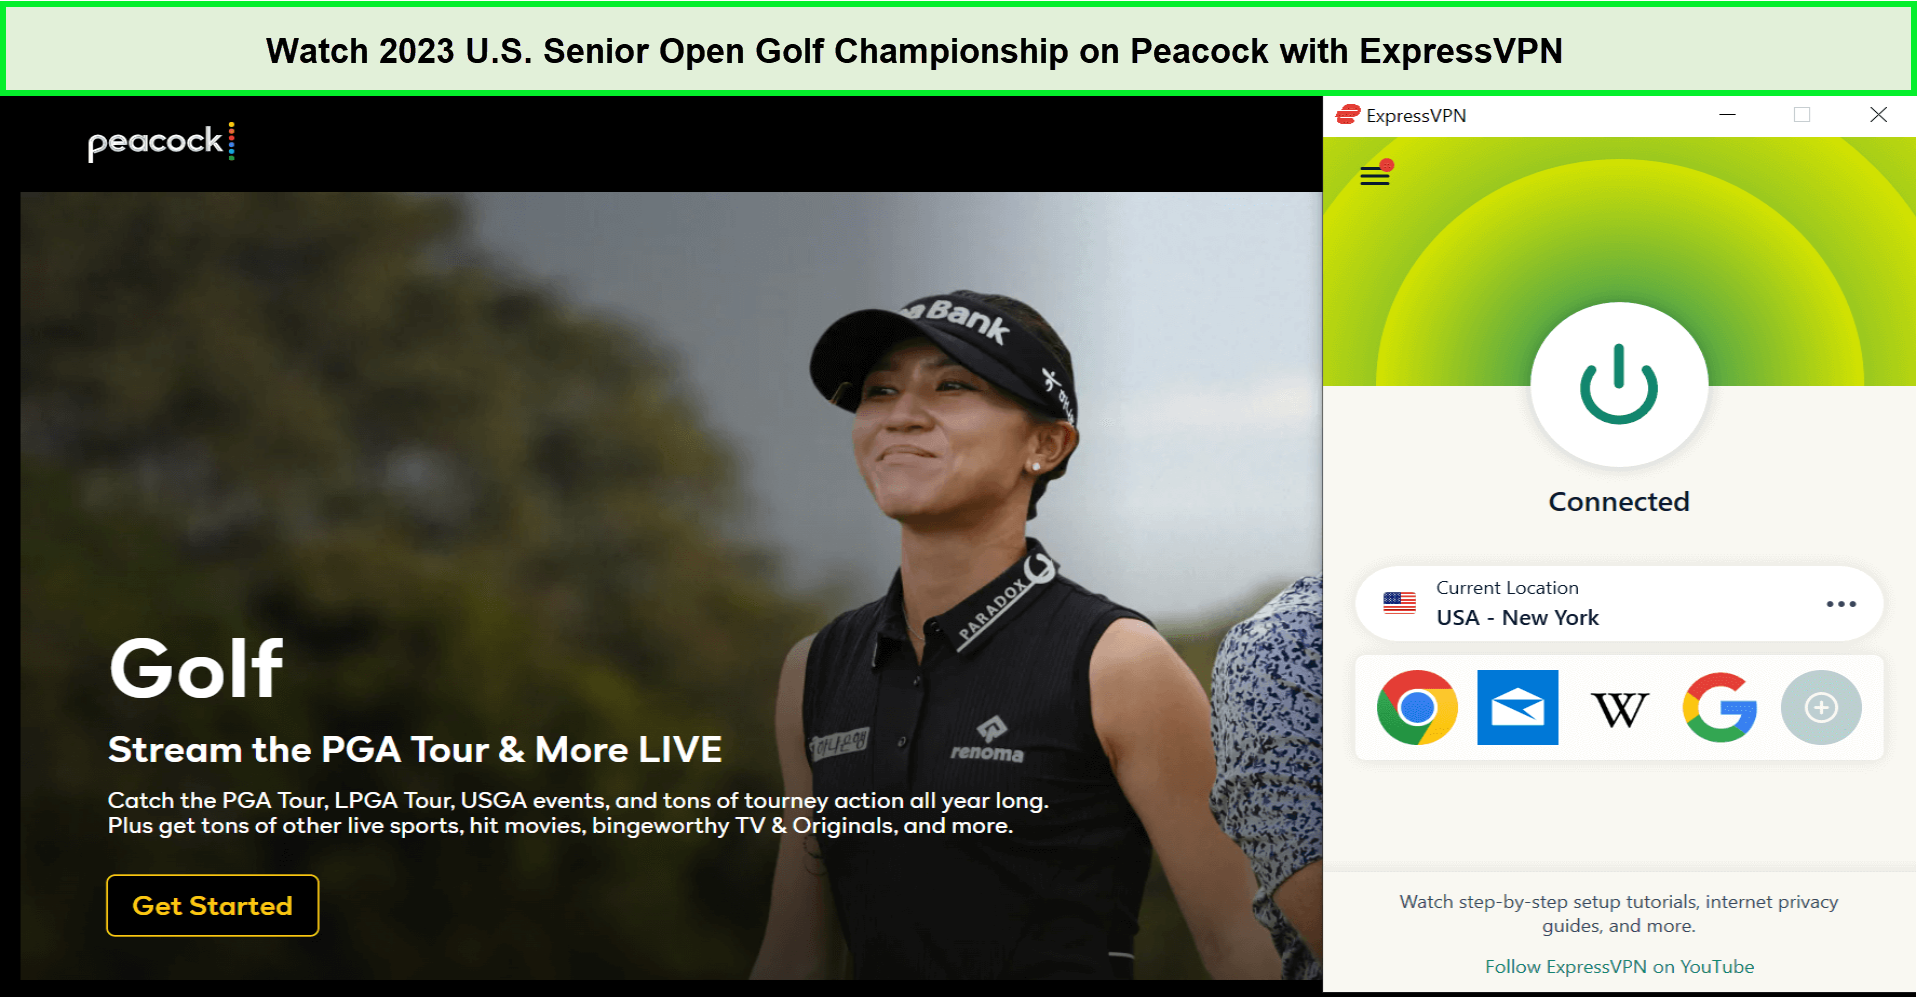 Watch-2023-U.S.-Senior-Open-Golf-Championship-in-Italy-on-Peacock-with-ExpressVPN